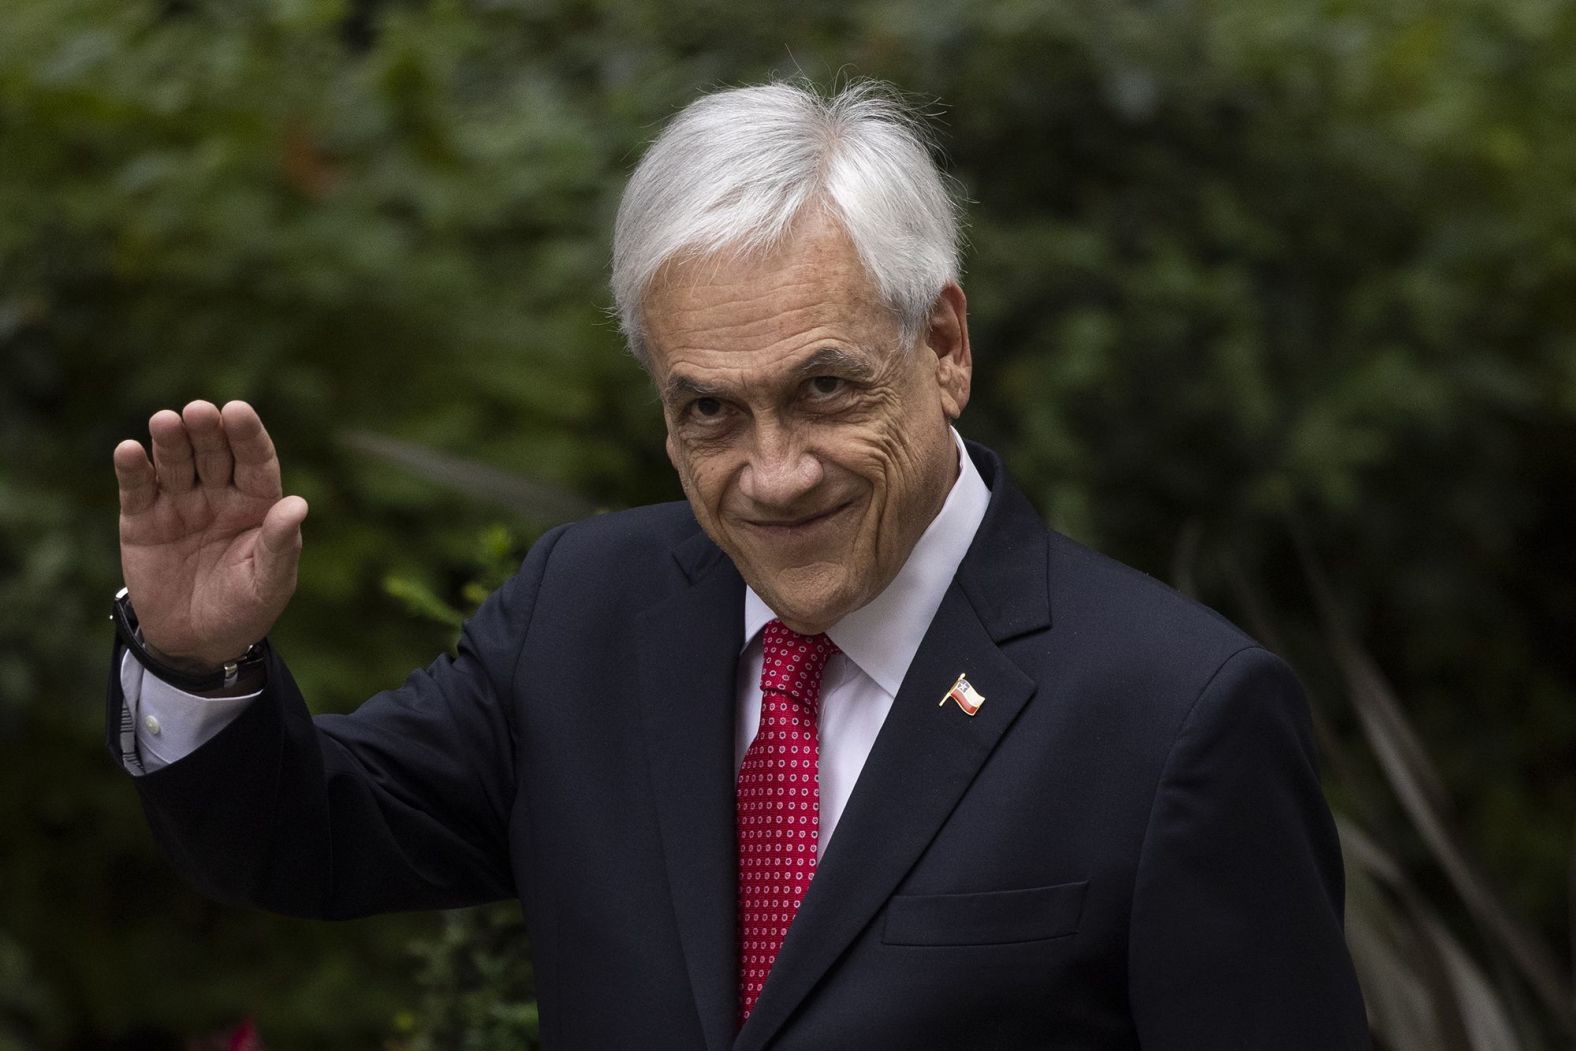 Former Chilean President <a href="https://www.cnn.com/2024/02/06/americas/chile-sebastian-pinera-dead-helicopter-crash-intl-latam/index.html" target="_blank">Sebastián Piñera</a> died in a helicopter crash in Chile, his office said in a statement on February 6. Piñera, 74, was Chile's president from 2010 to 2014 and again from 2018 to 2022.